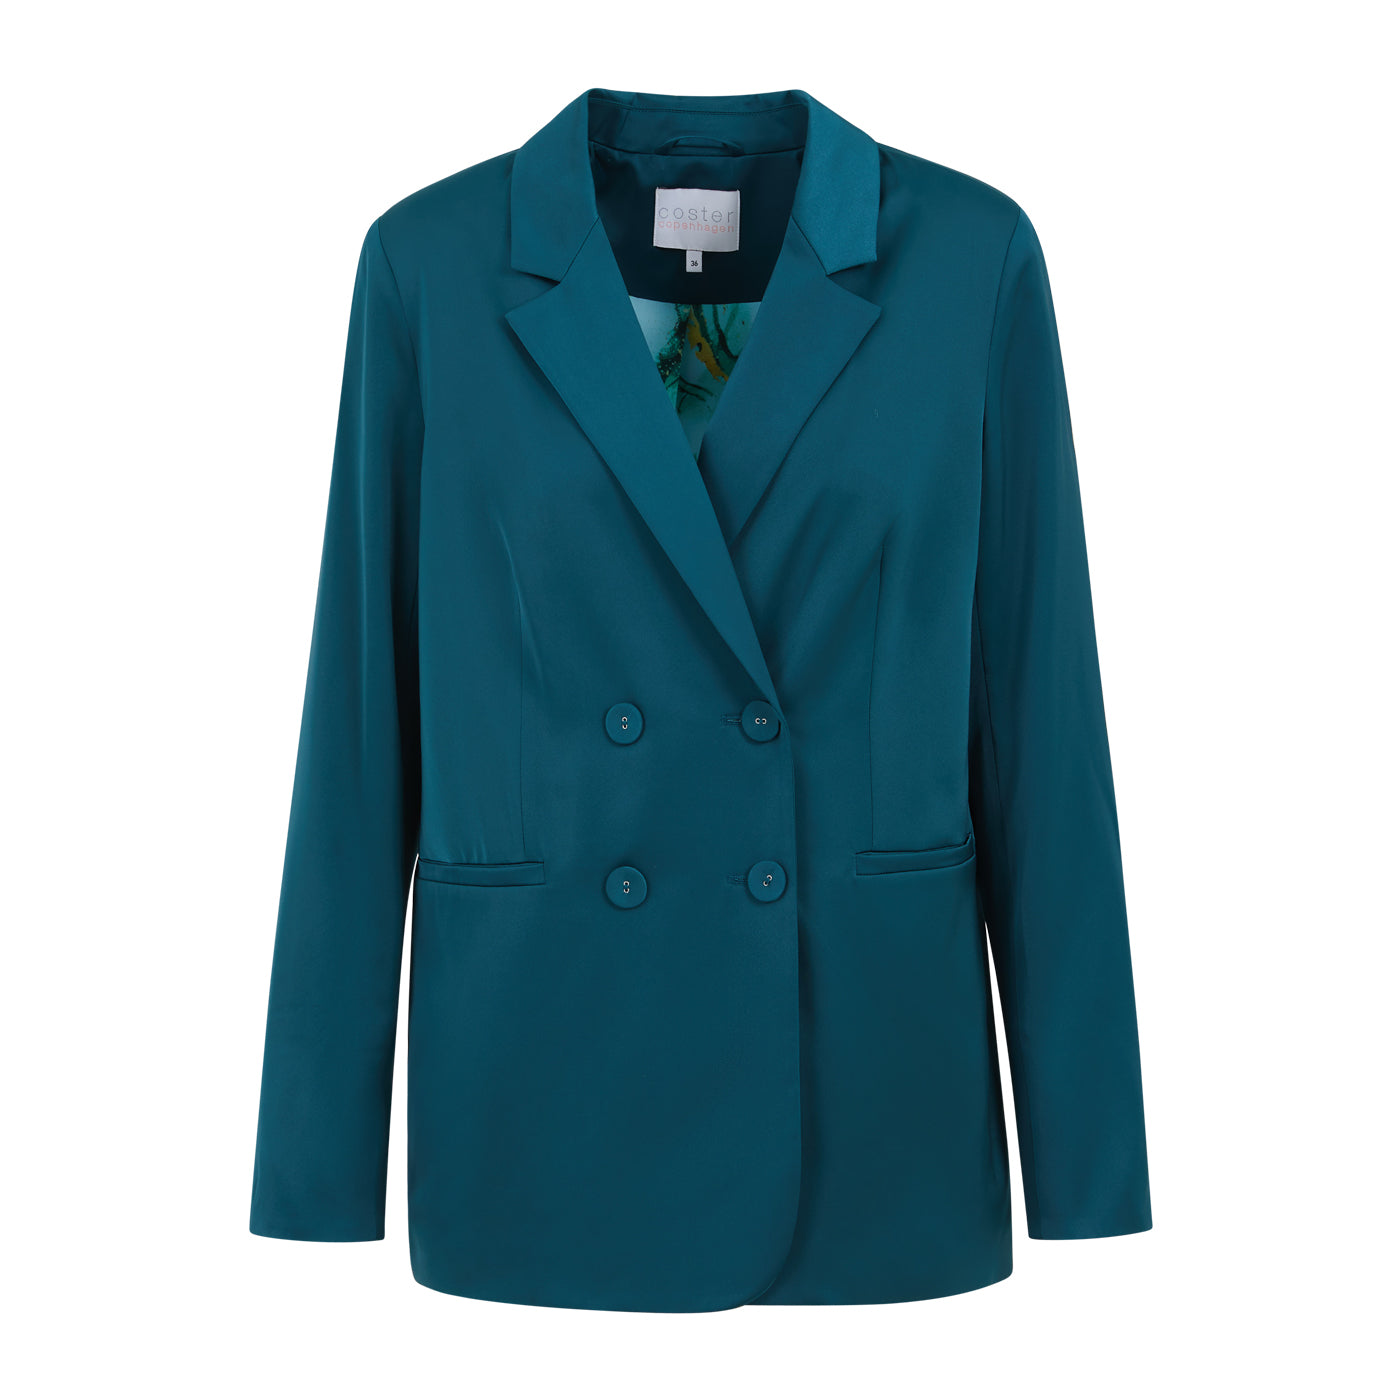 Indulge in the luxurious quality of our coveted Scandi brand Coster Copenhagen's relaxed blazer. Its oversized, double-breasted design exudes effortless cool, making it a versatile choice for both casual and formal occasions. Elevate your style game by pairing it with jeans or a dress for an exclusive touch.